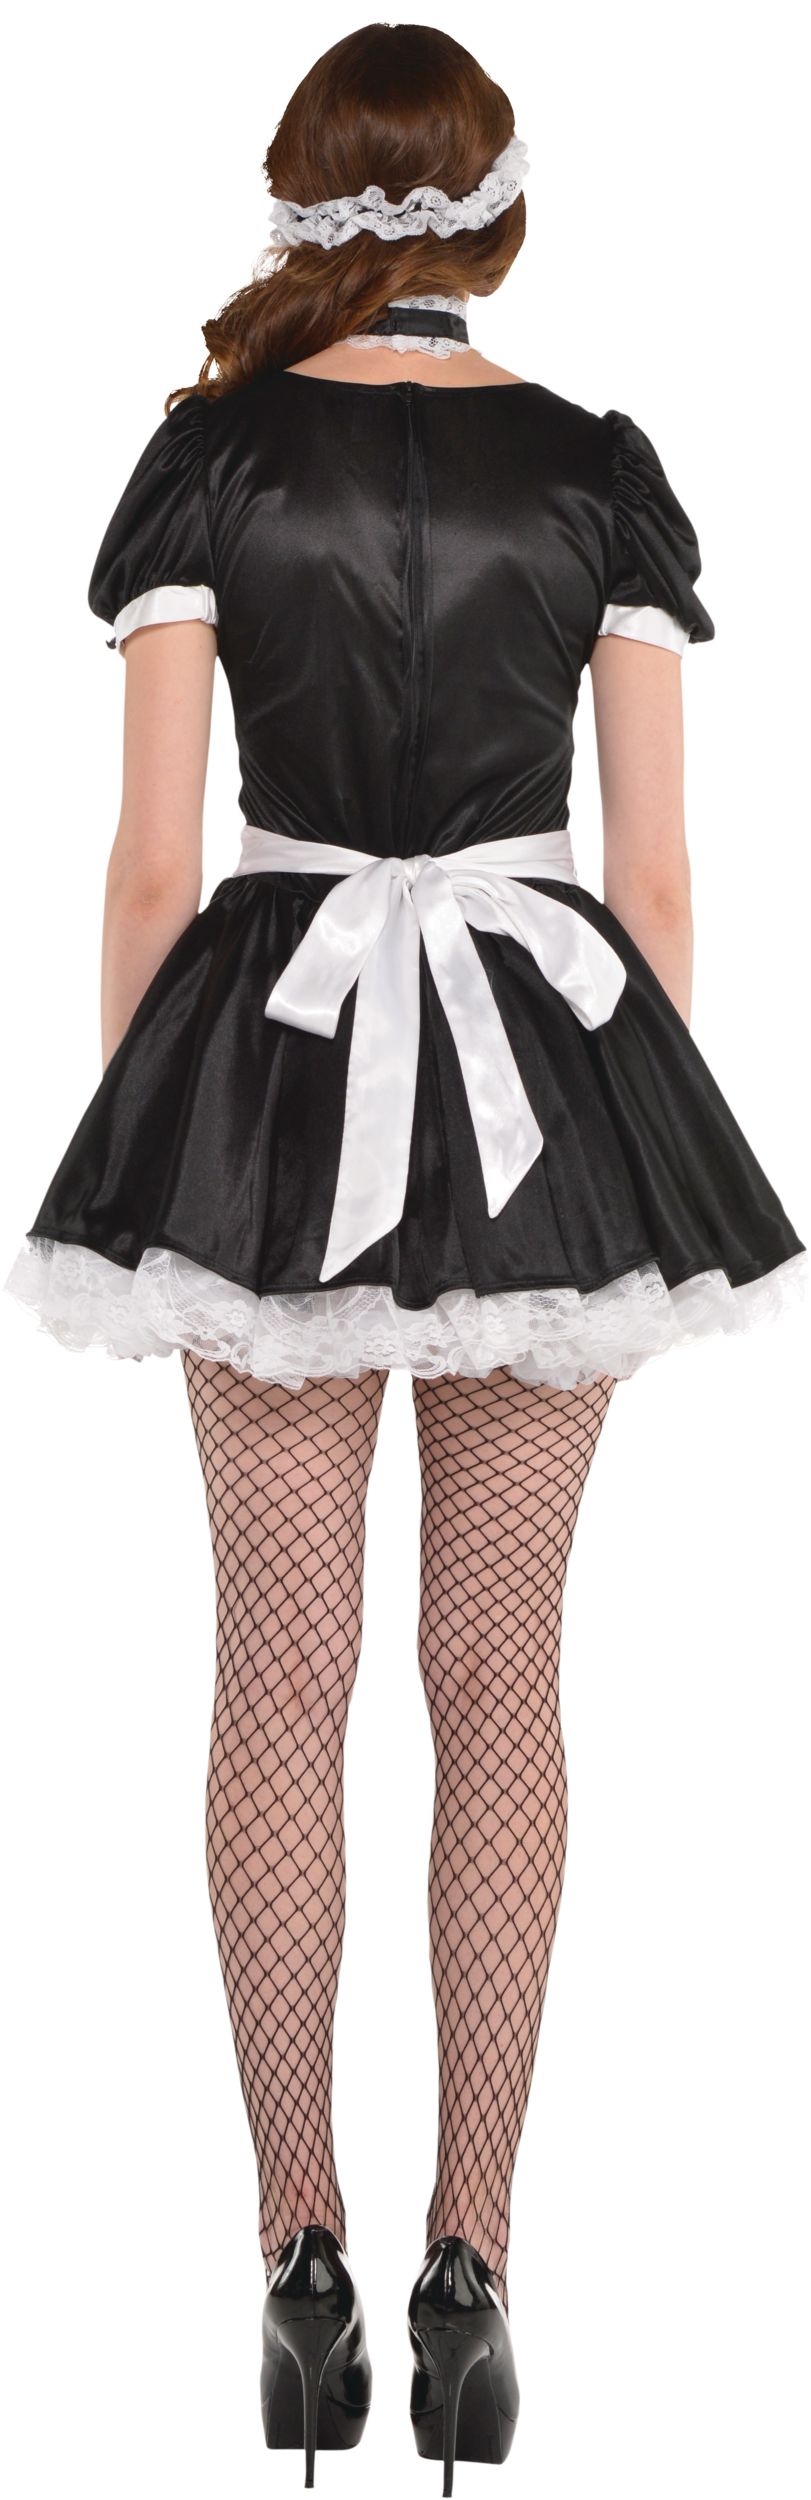 French Maid Costume Dress Form